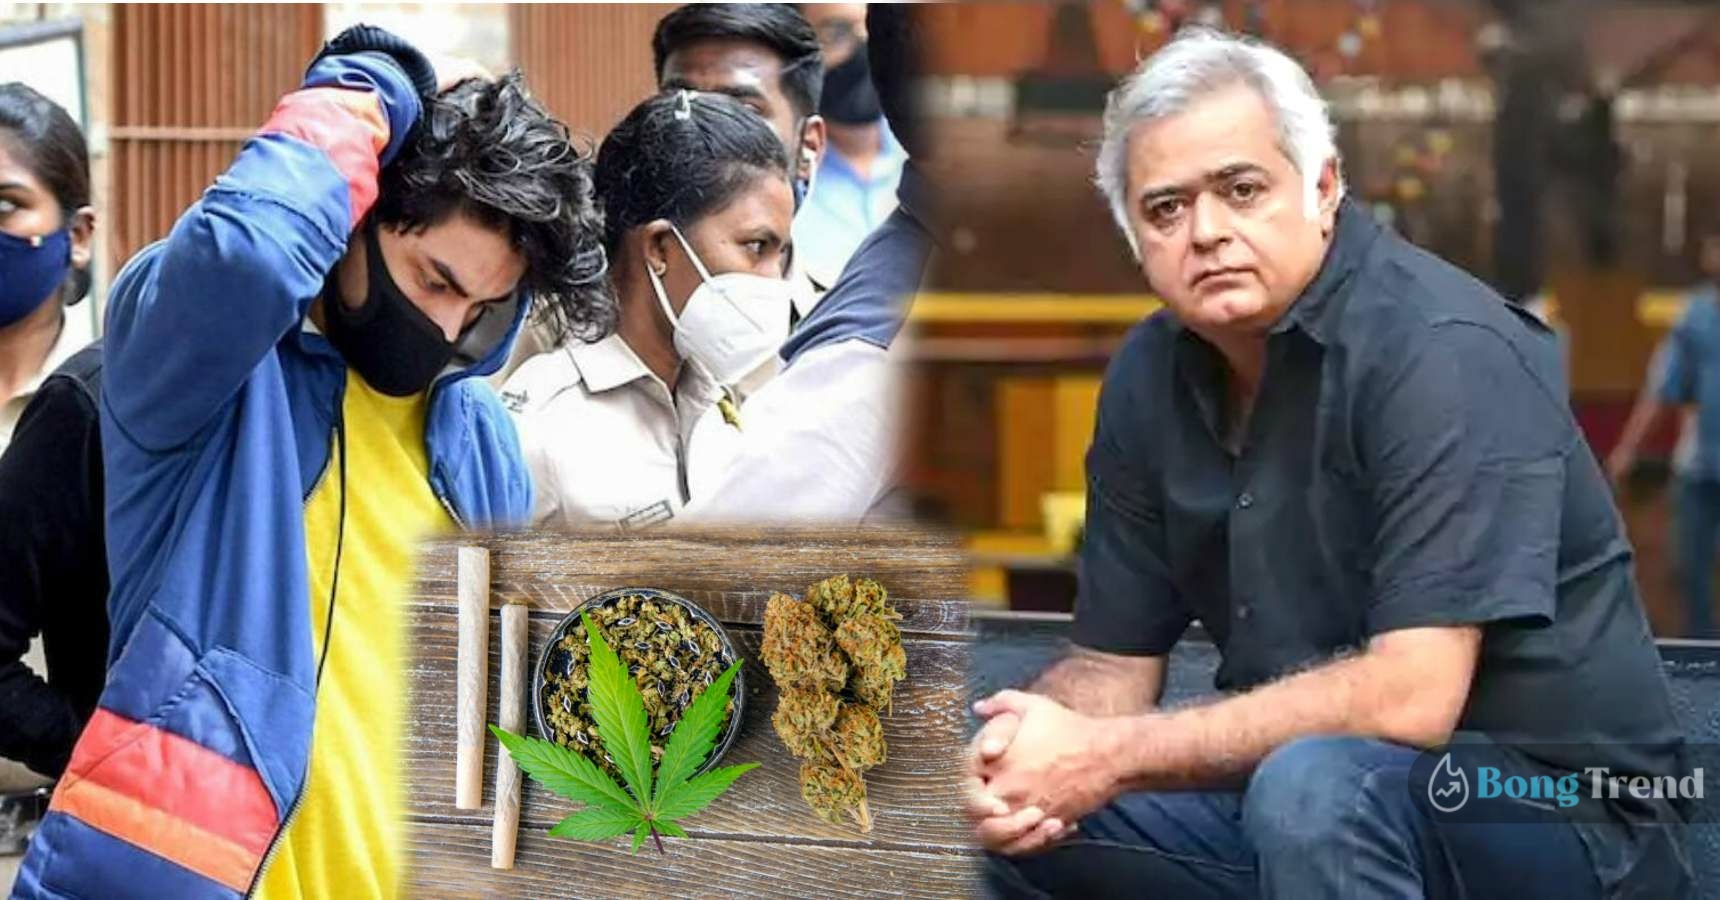 Bollywood Producer Hansal Mehta says Weed should be legalized in india